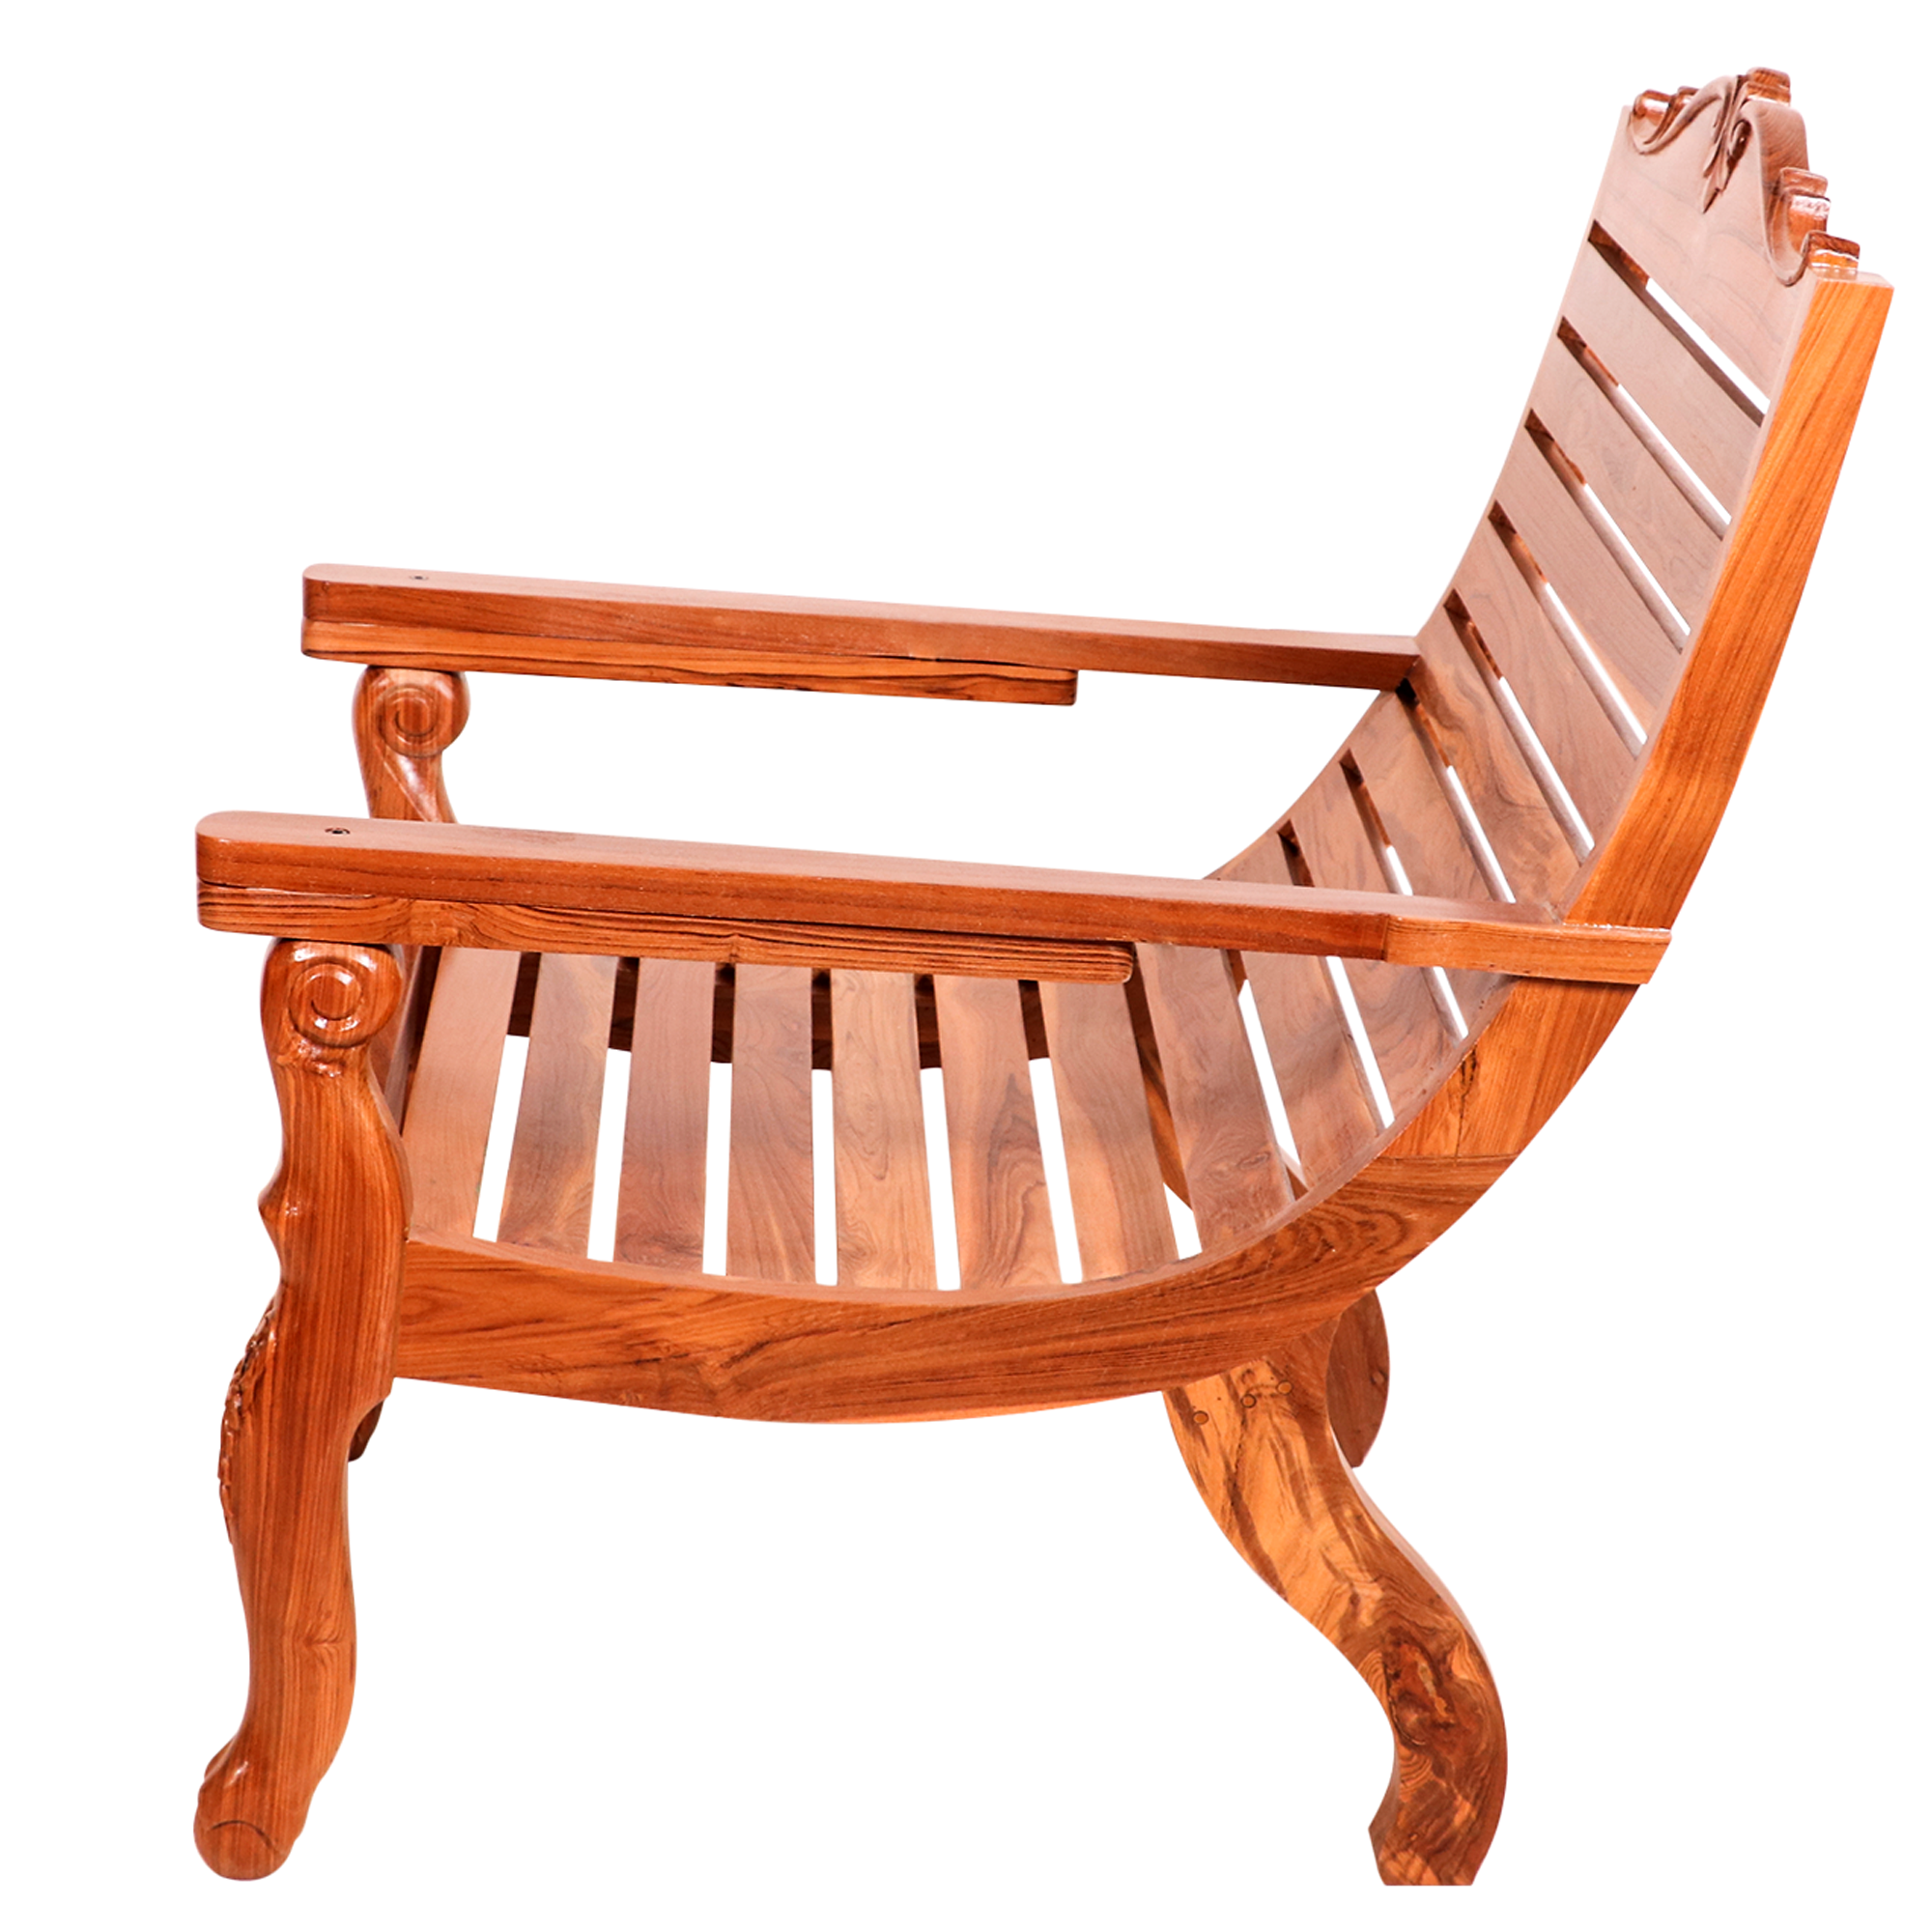 Solid Wood Stripped Traditional Recliner Planters Chair Easy Chair